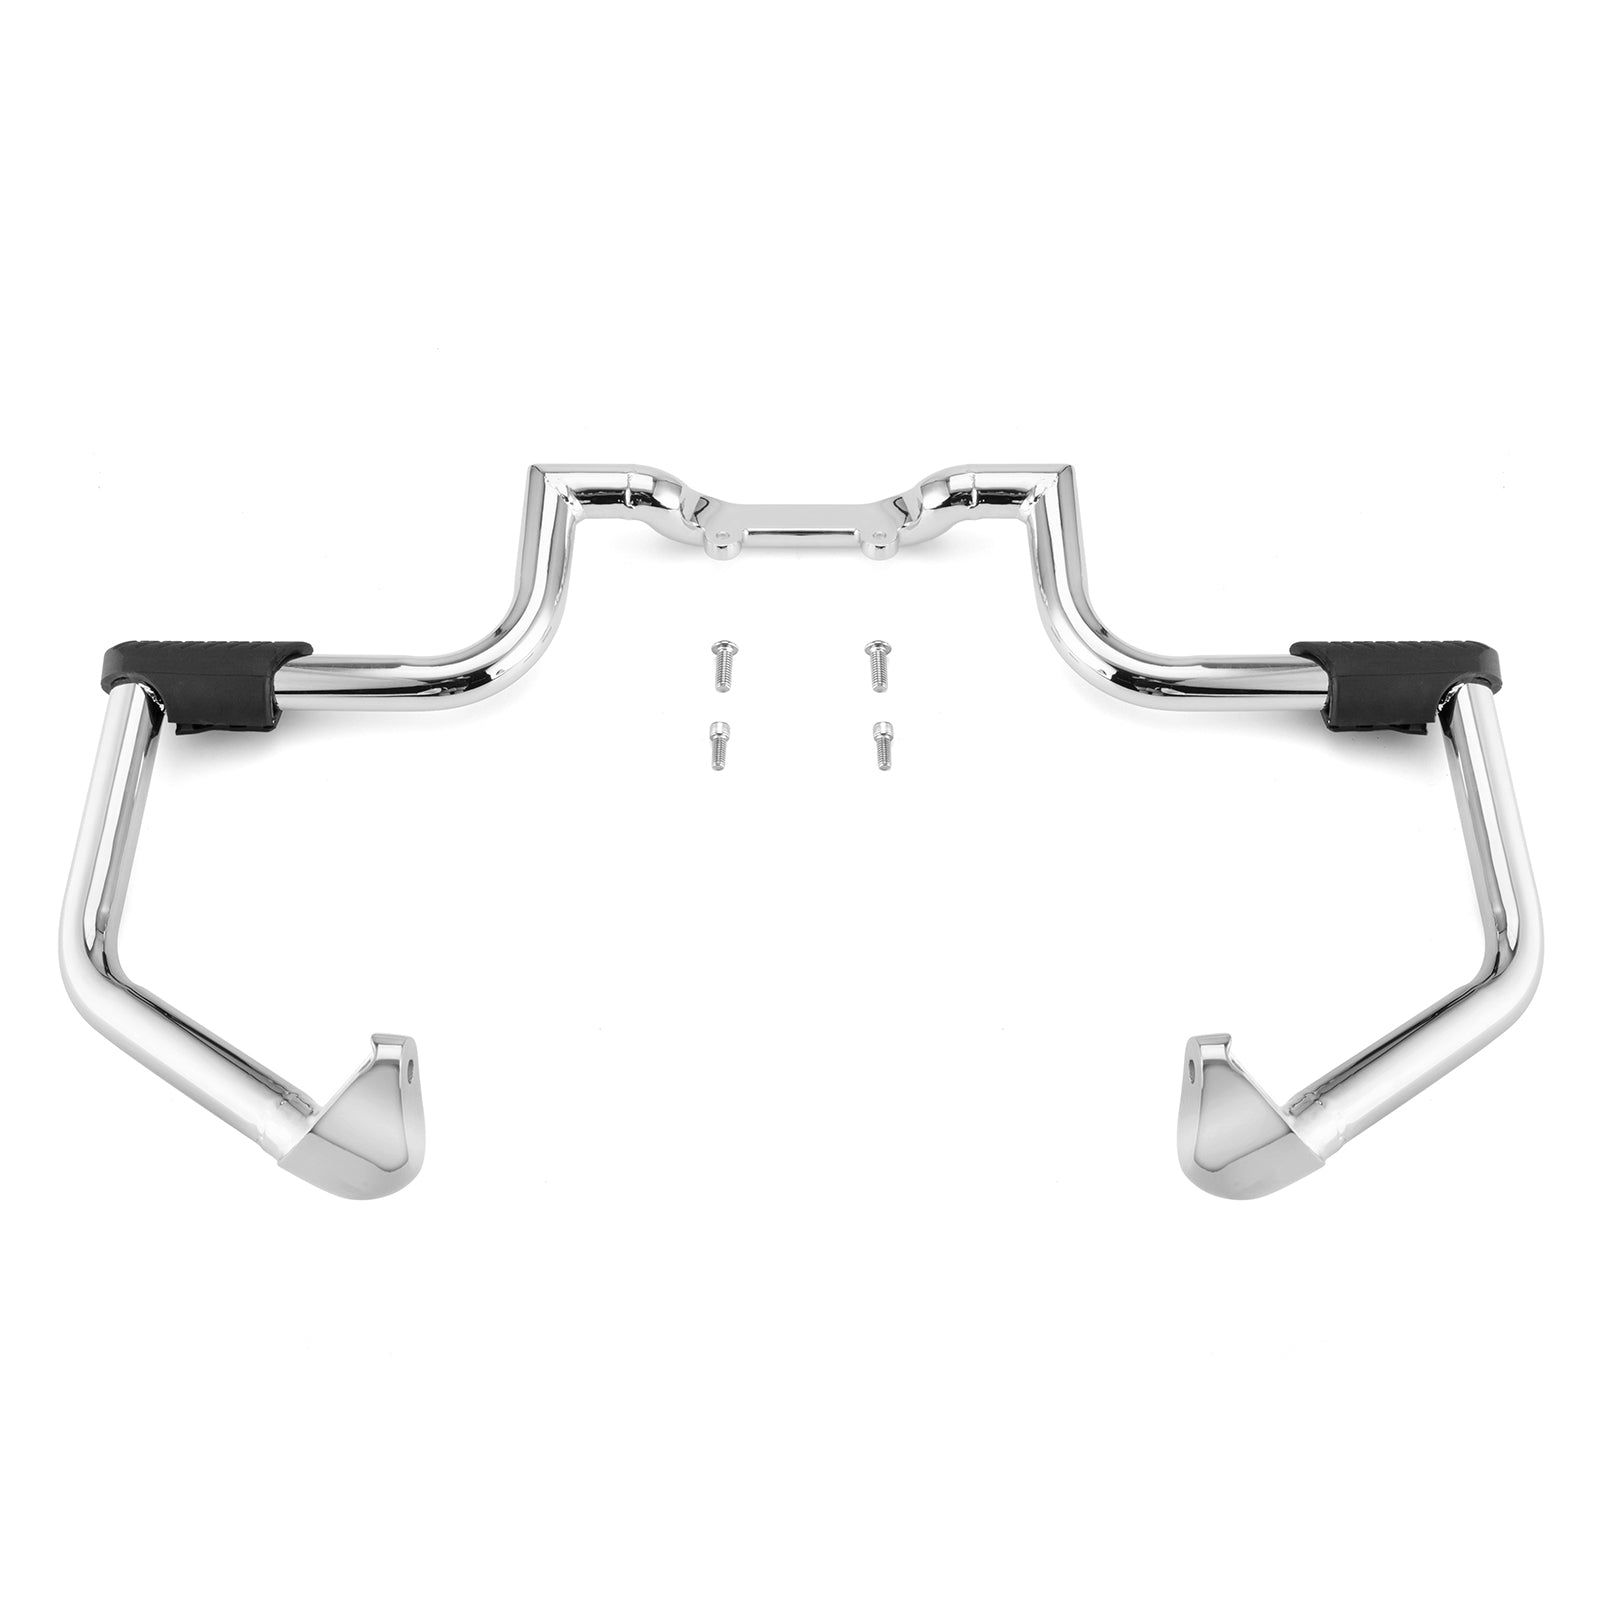 Buy chrome-silver 2014+ Indian Chief Classic Dark Horse Mustache Engine Guard Highway Crash Bars